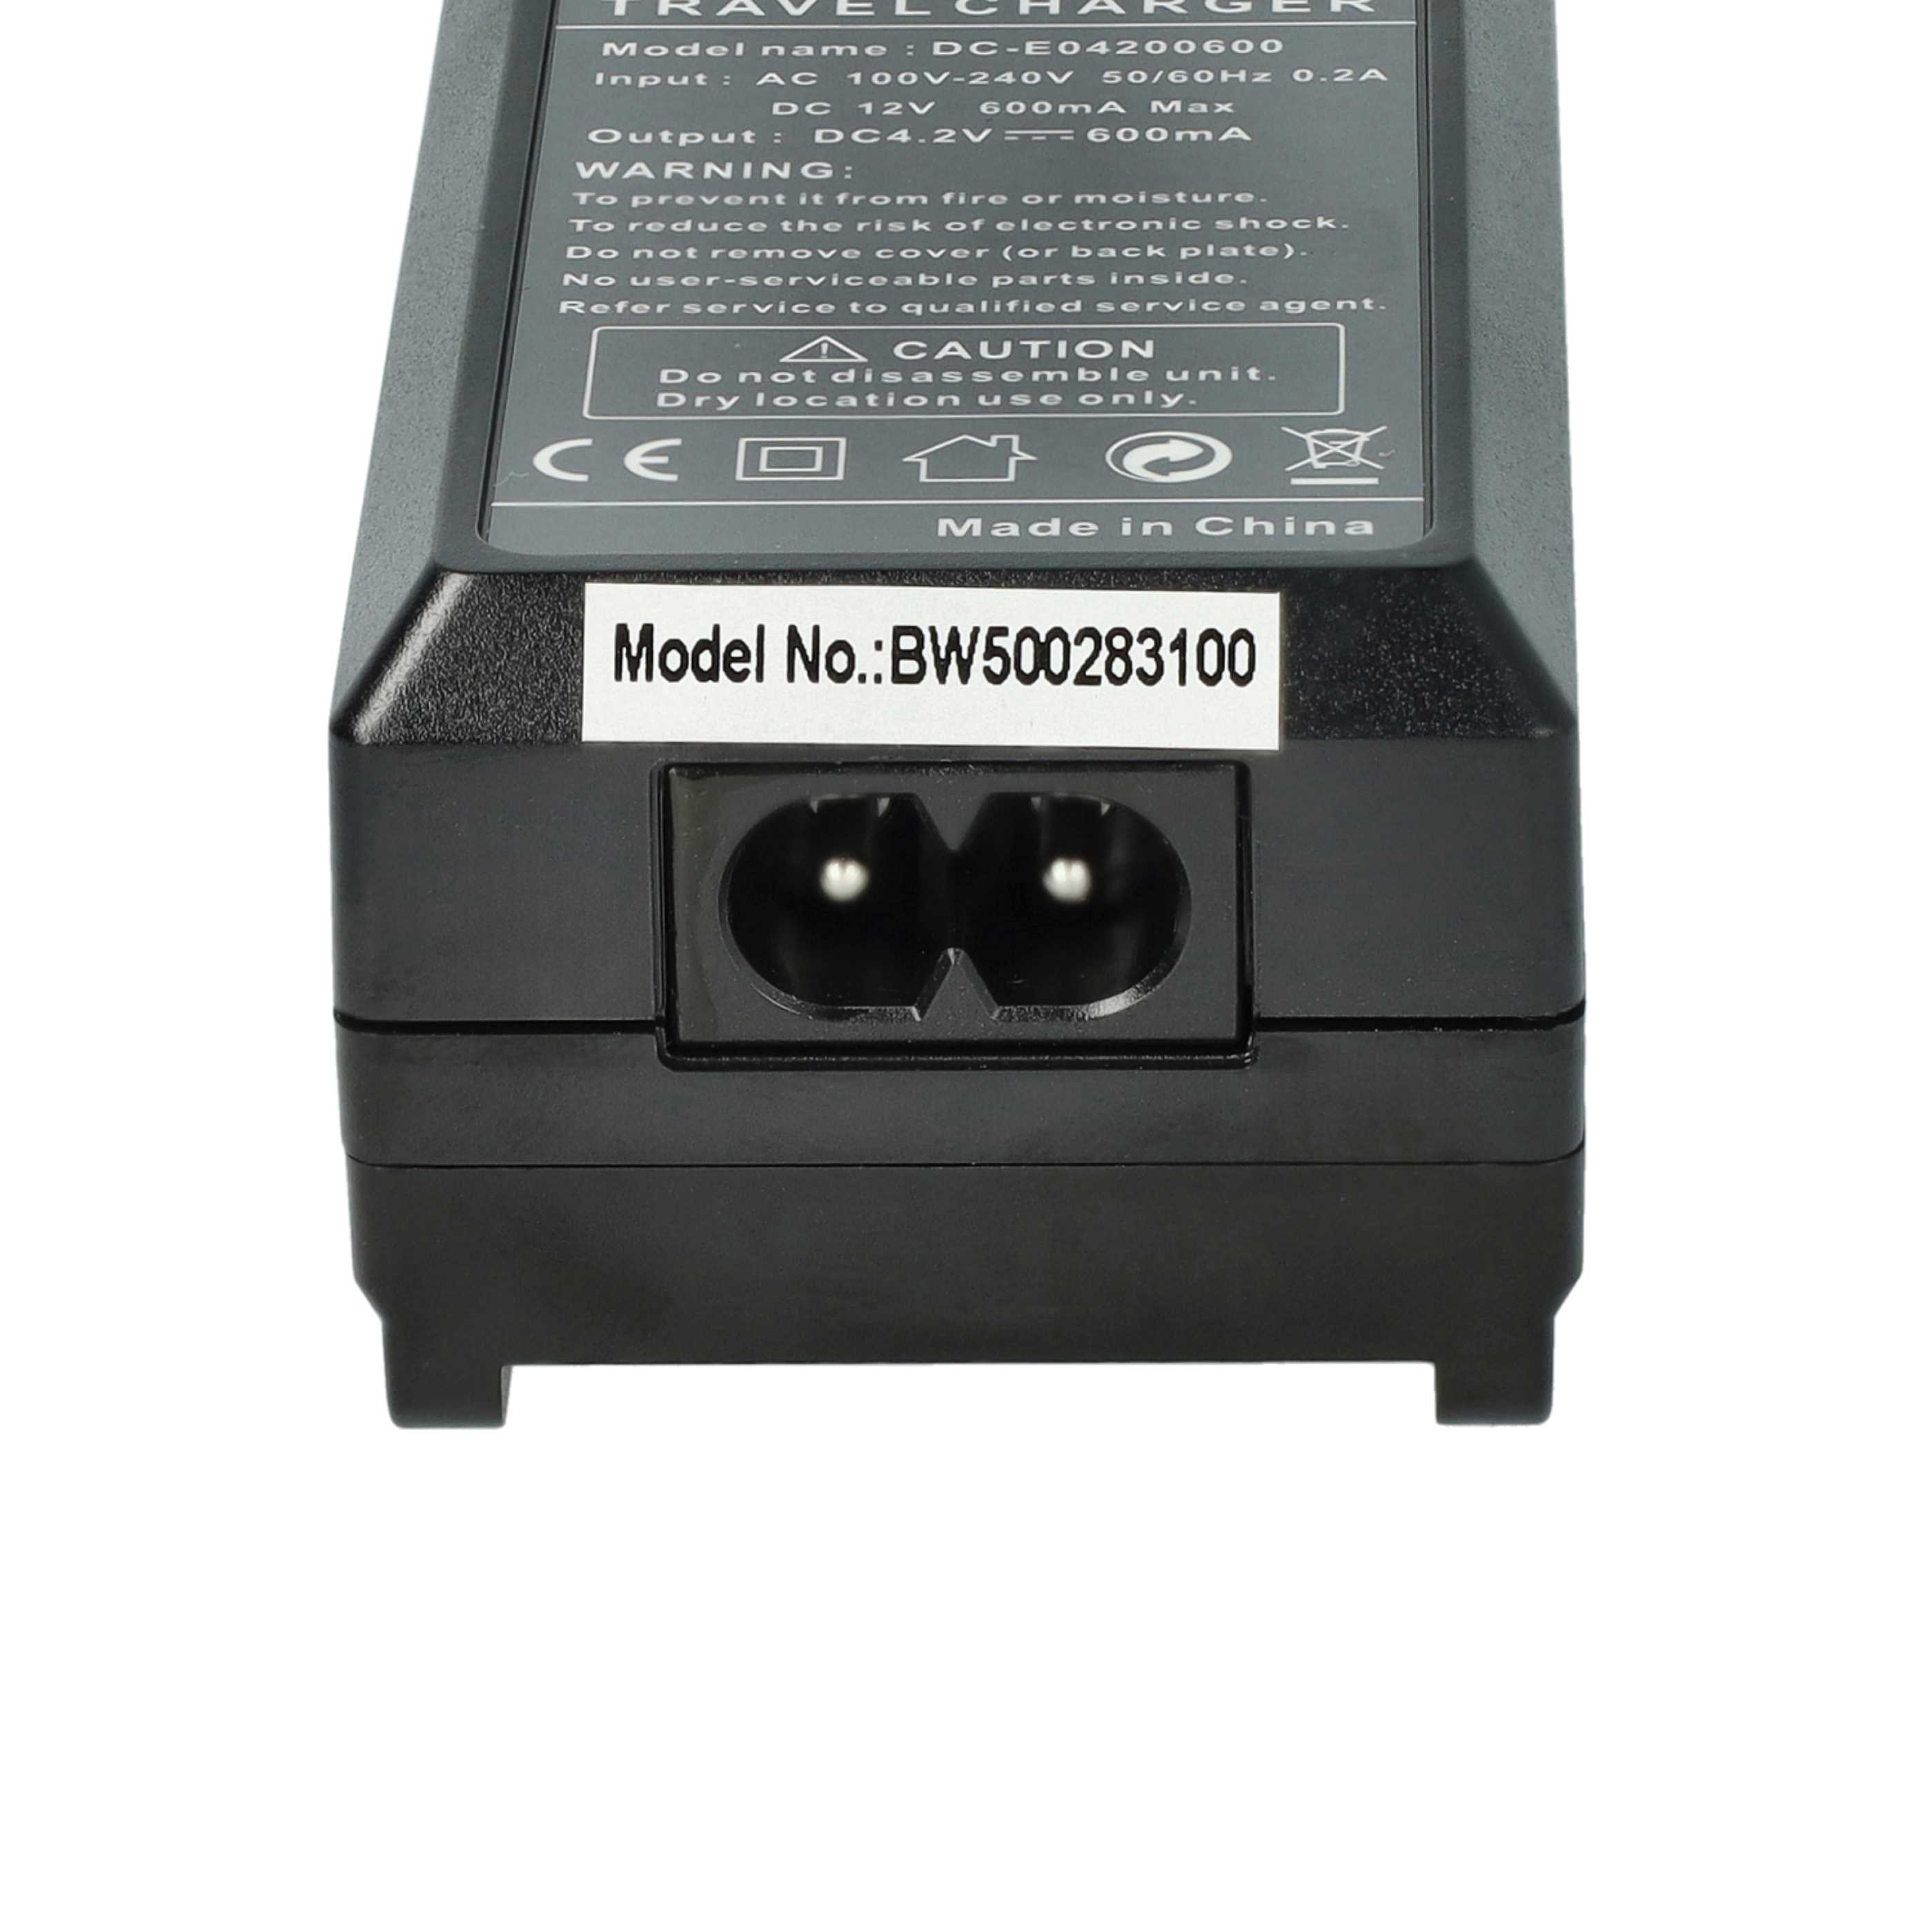 Battery Charger suitable for General Imaging GB-20 Camera etc. - 0.6 A, 4.2 V